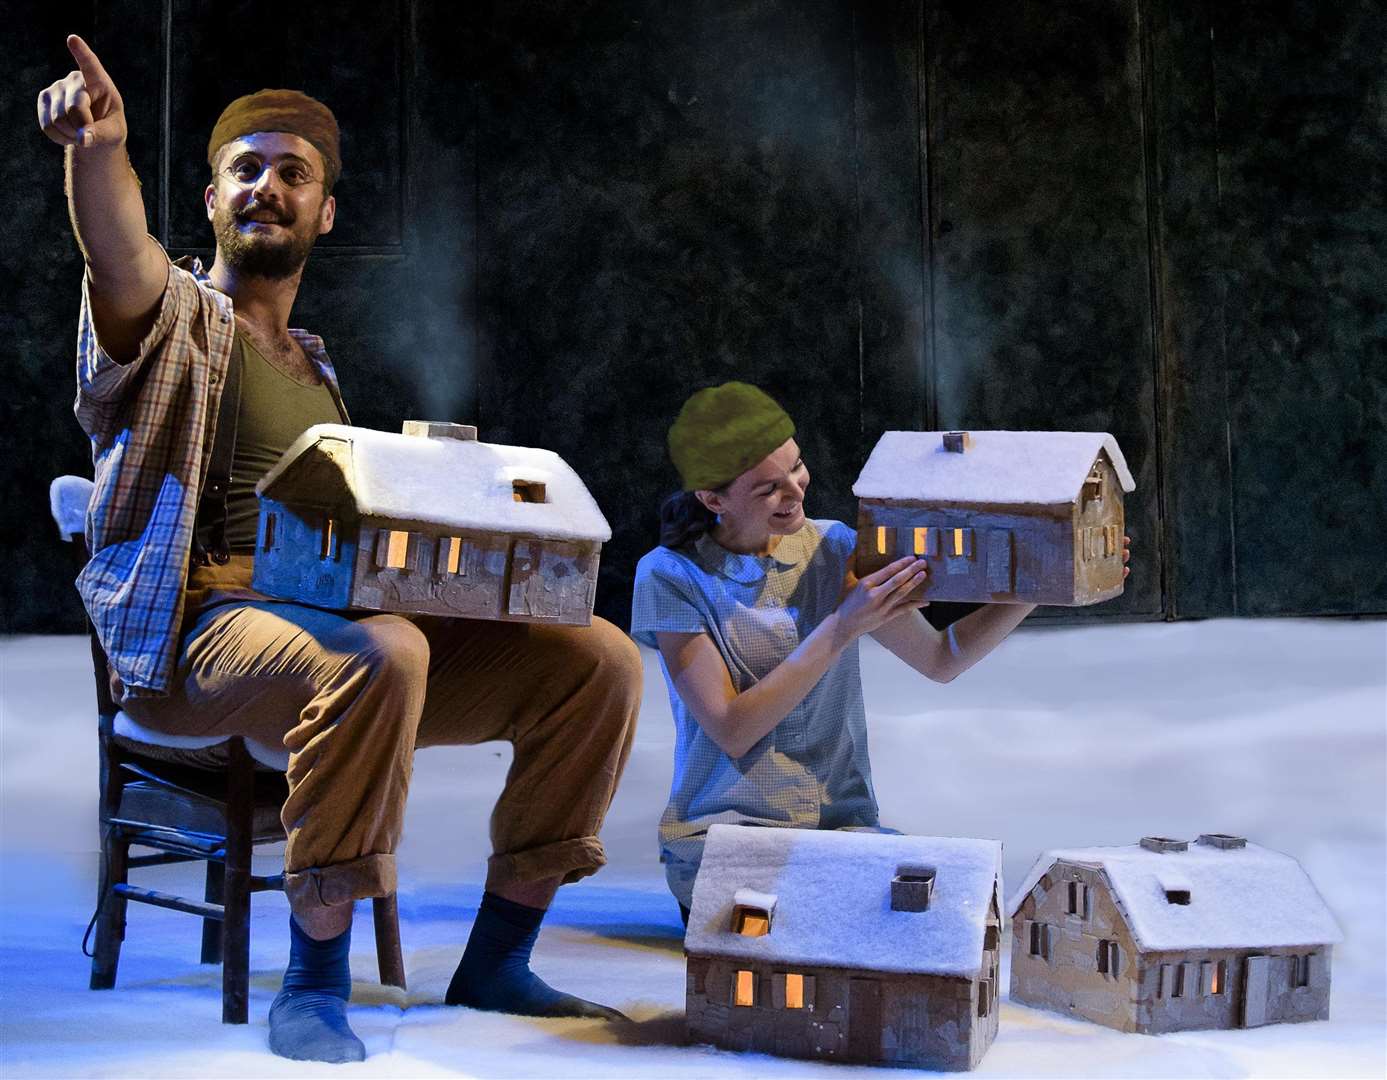 The Heart of Winter show is suitable for children aged three and up